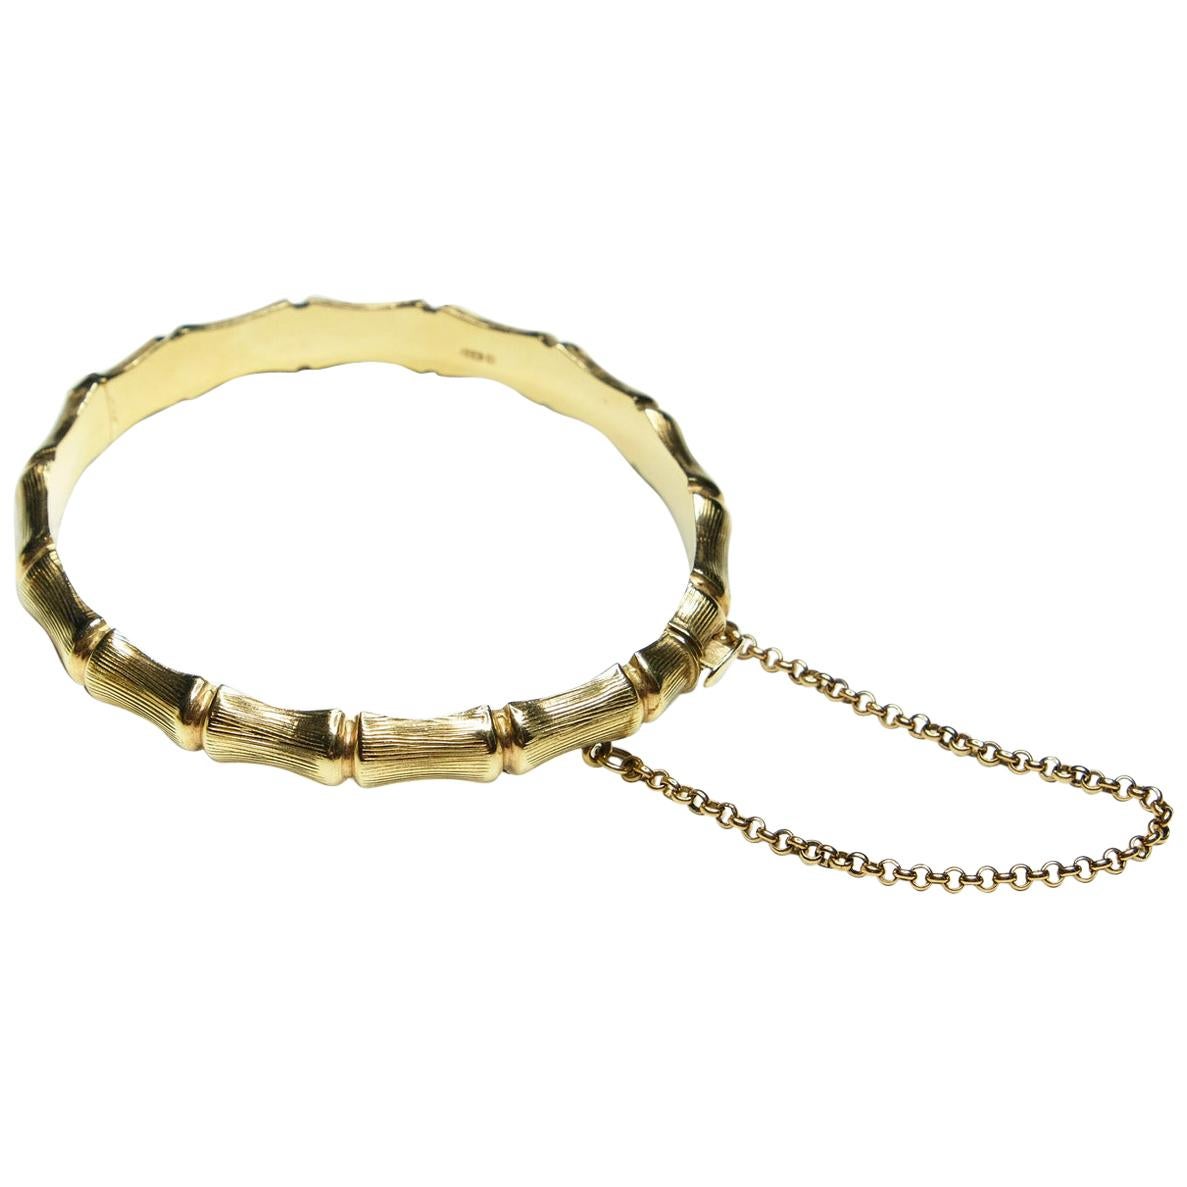 Bamboo Bracelet 9 Carat Yellow Gold, British Made For Sale